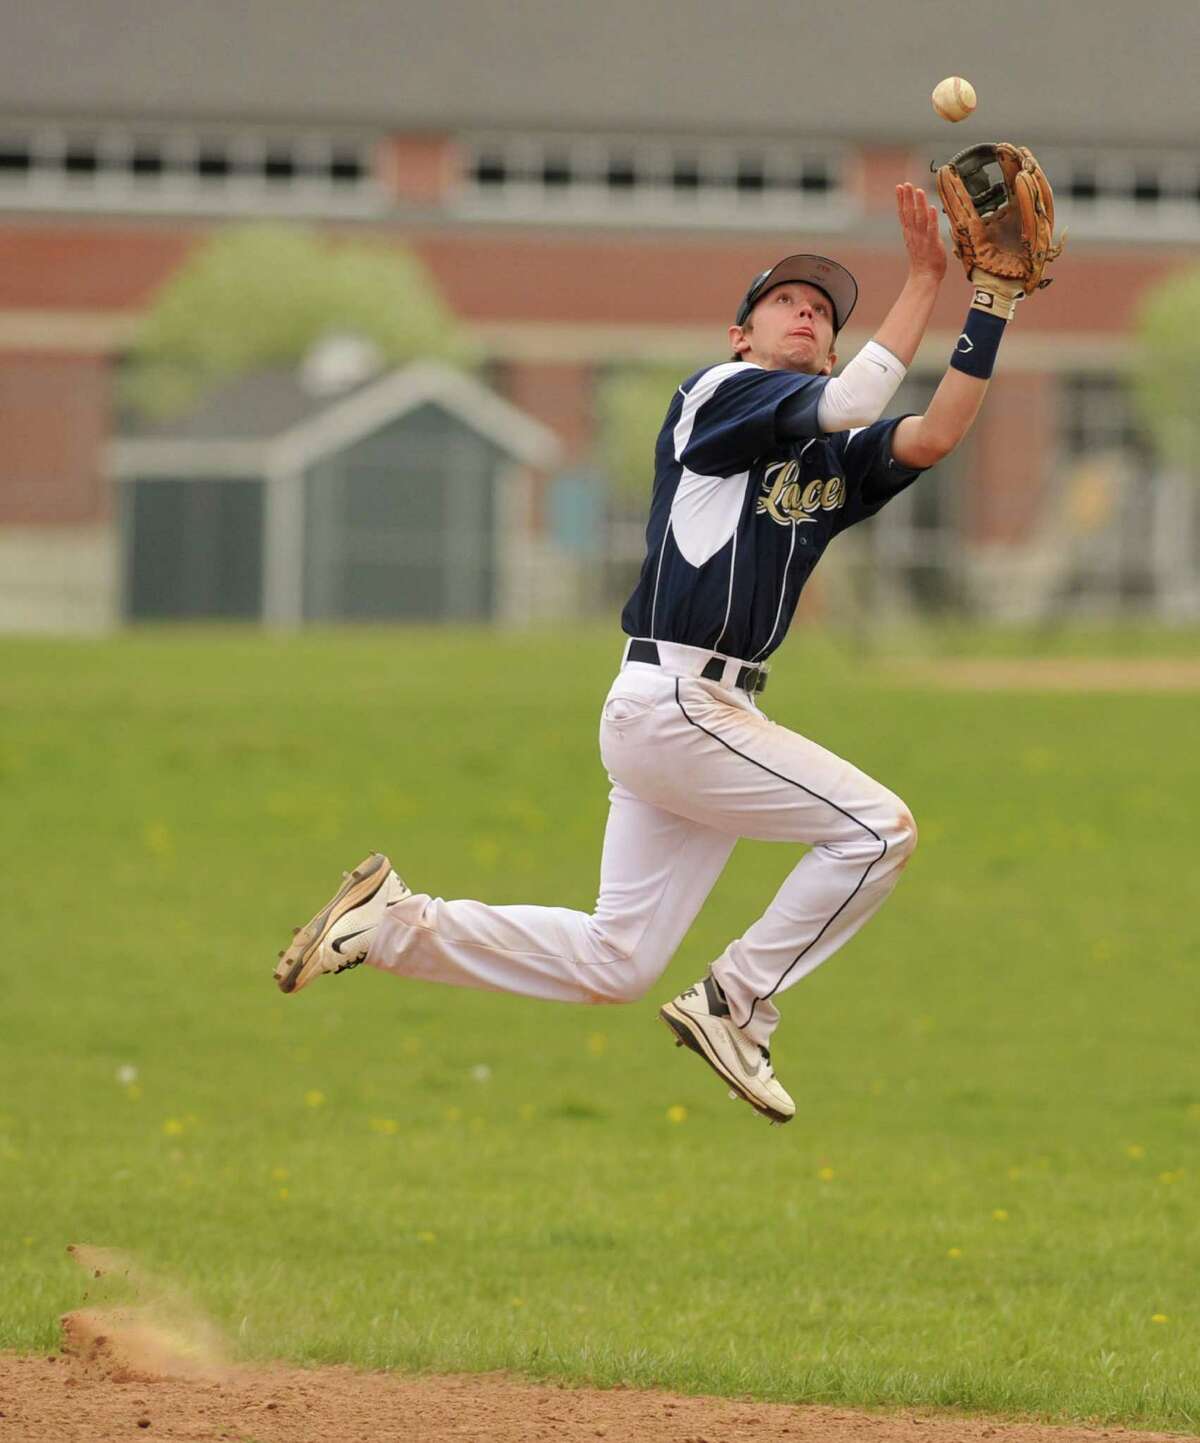 Notre Dame Fairfield second baseman Erik Laaksonen leaps to make a catch during their game against New Milford at New Milford High School on Wednesday, April 18, 2012. New Milford won 10-6.